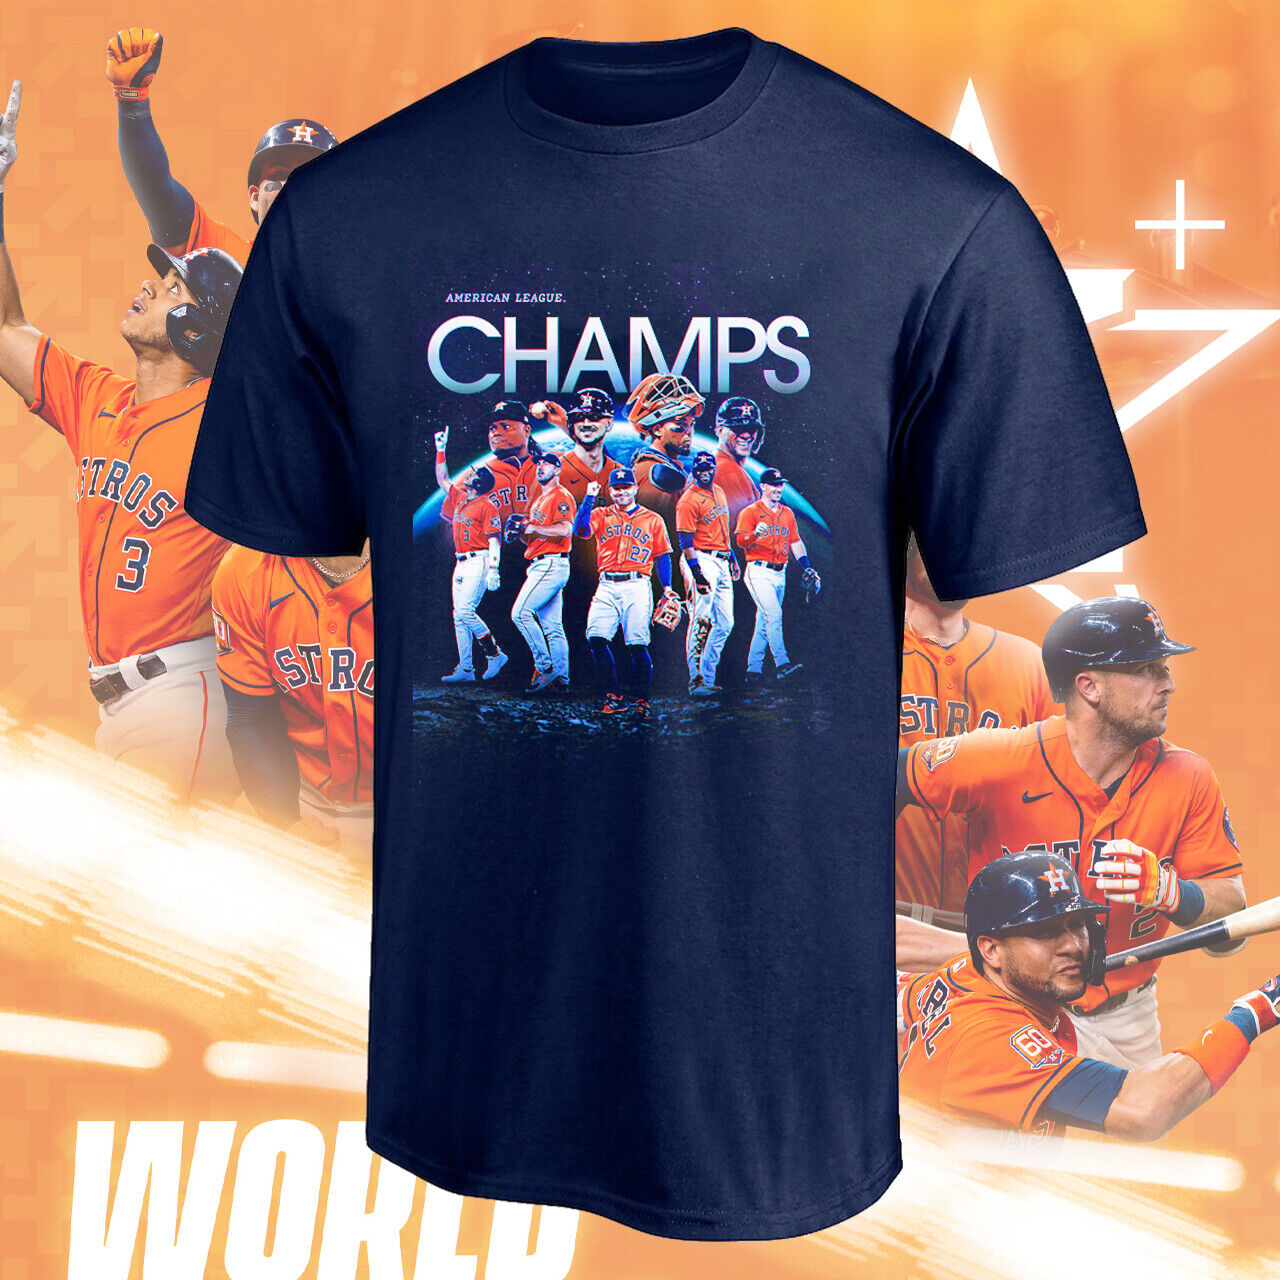 Houston Astros 2022 World Baseball Series Finals Champs T-shirt S-5xl Size Up To 5xl